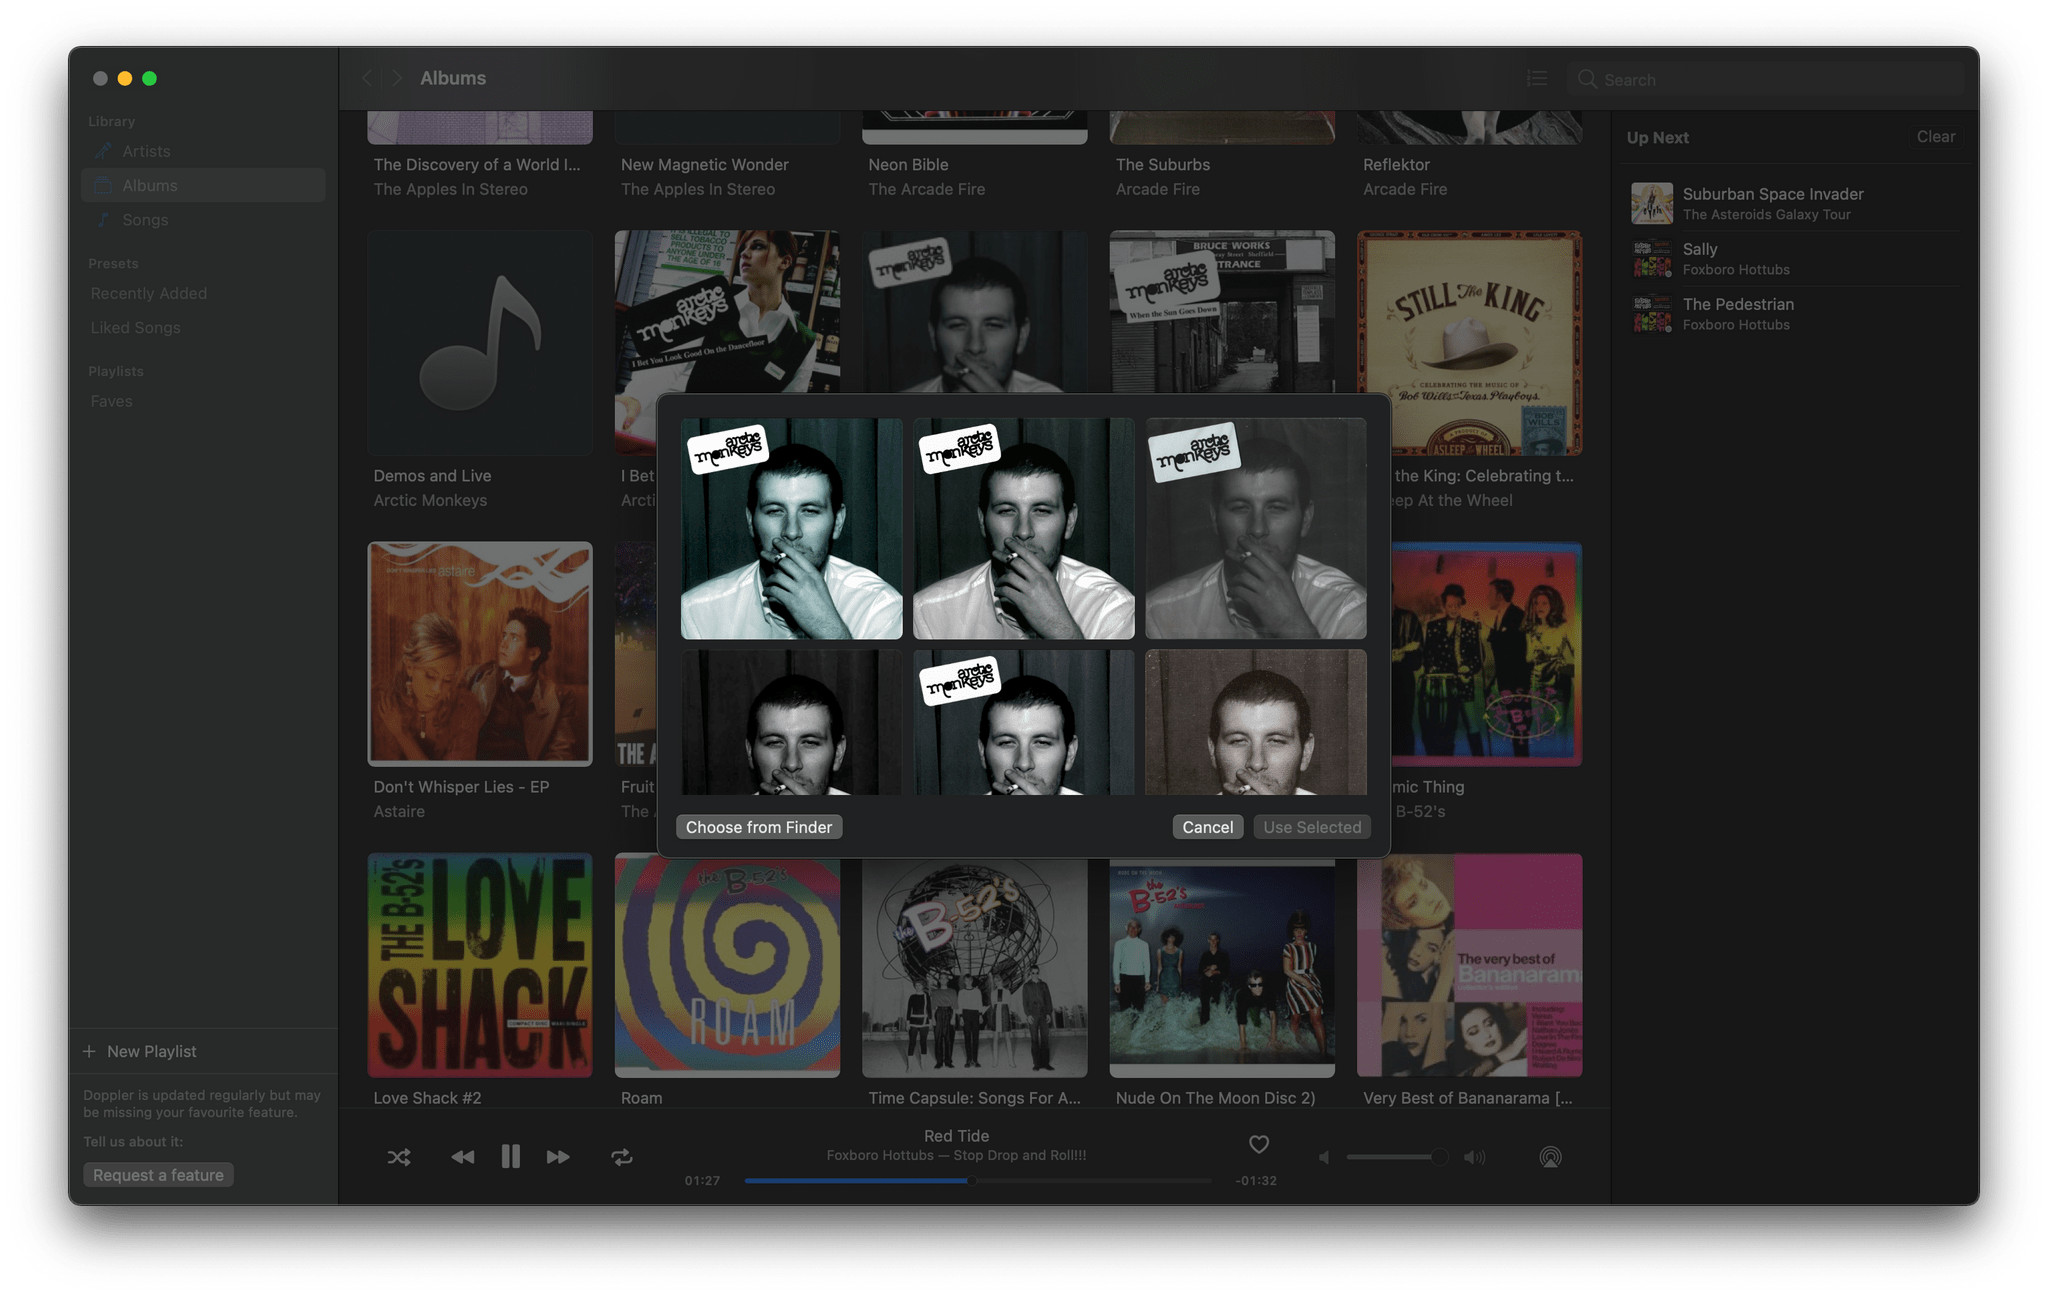 Doppler's Search for Artwork feature makes it easy to fill in any missing album art.